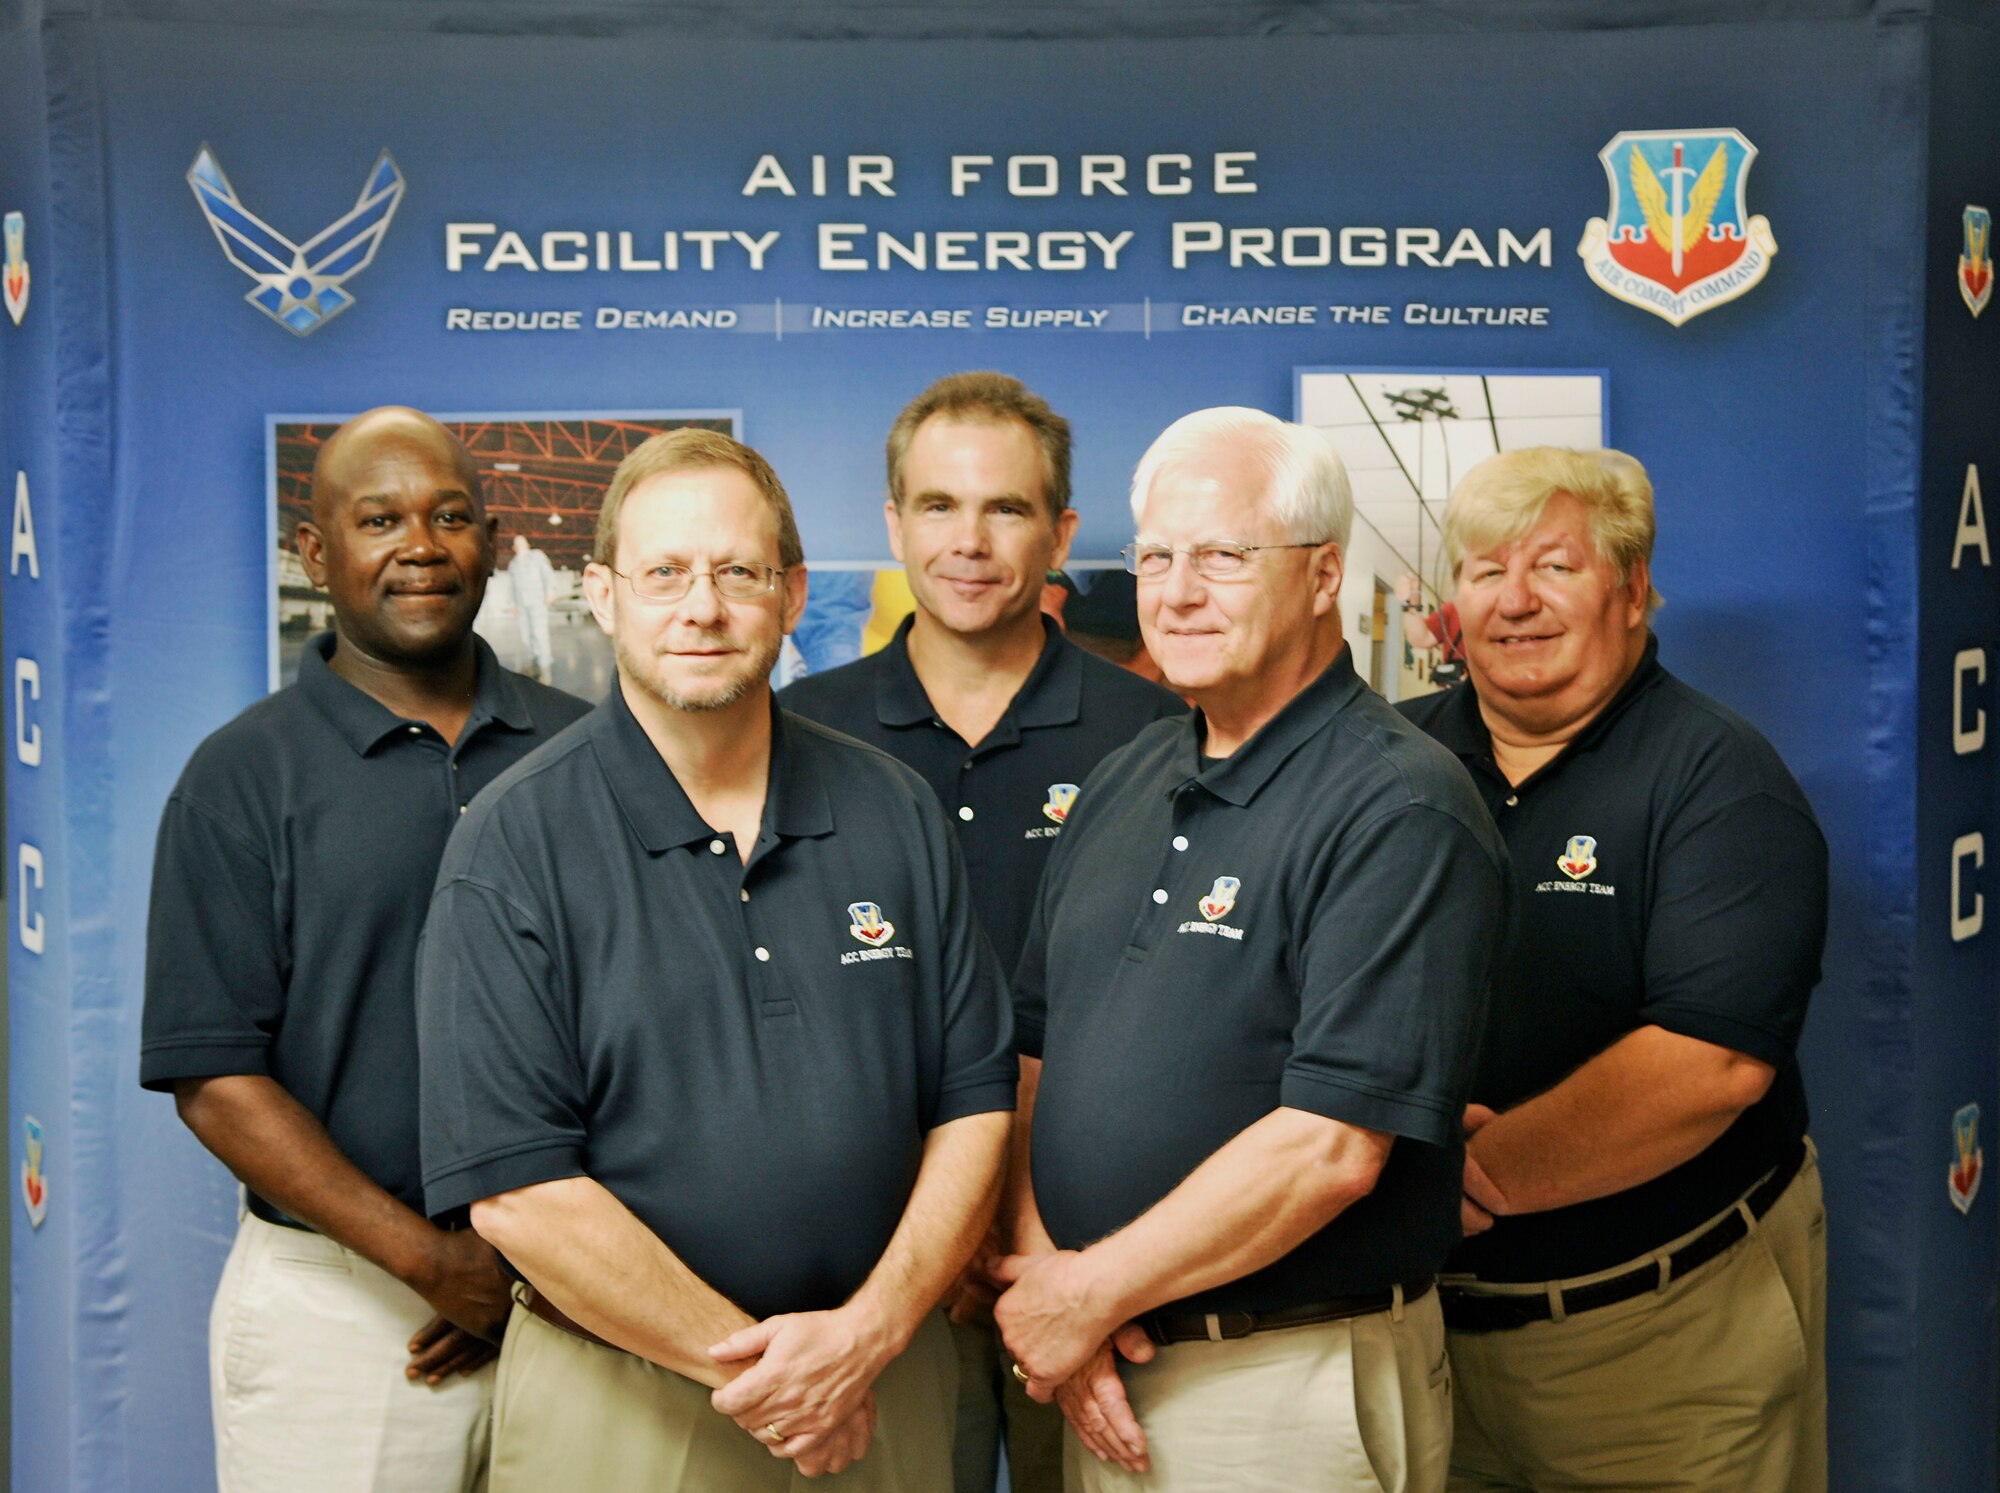 JOINT BASE LANGLEY-EUSTIS, Va. -- The Air Combat Command facility energy team expertly managed a comprehensive program for 16 installations earning them a 2013 Federal Energy Management Program Award. Among its many achievements, the team oversaw the award of 39 energy projects, which are expected to save 450,450 MBTUs and $5.5 million annually. Pictured from left: Resource Efficiency Manager John McDuffie, Energy Projects Manager Steven White, Energy Management Systems Manager William Turnbull, Program Analyst William Kuster and Energy Technical Advisor Dennis Svalstad.  (U.S. Air Force photo/Sachel Seabrook)